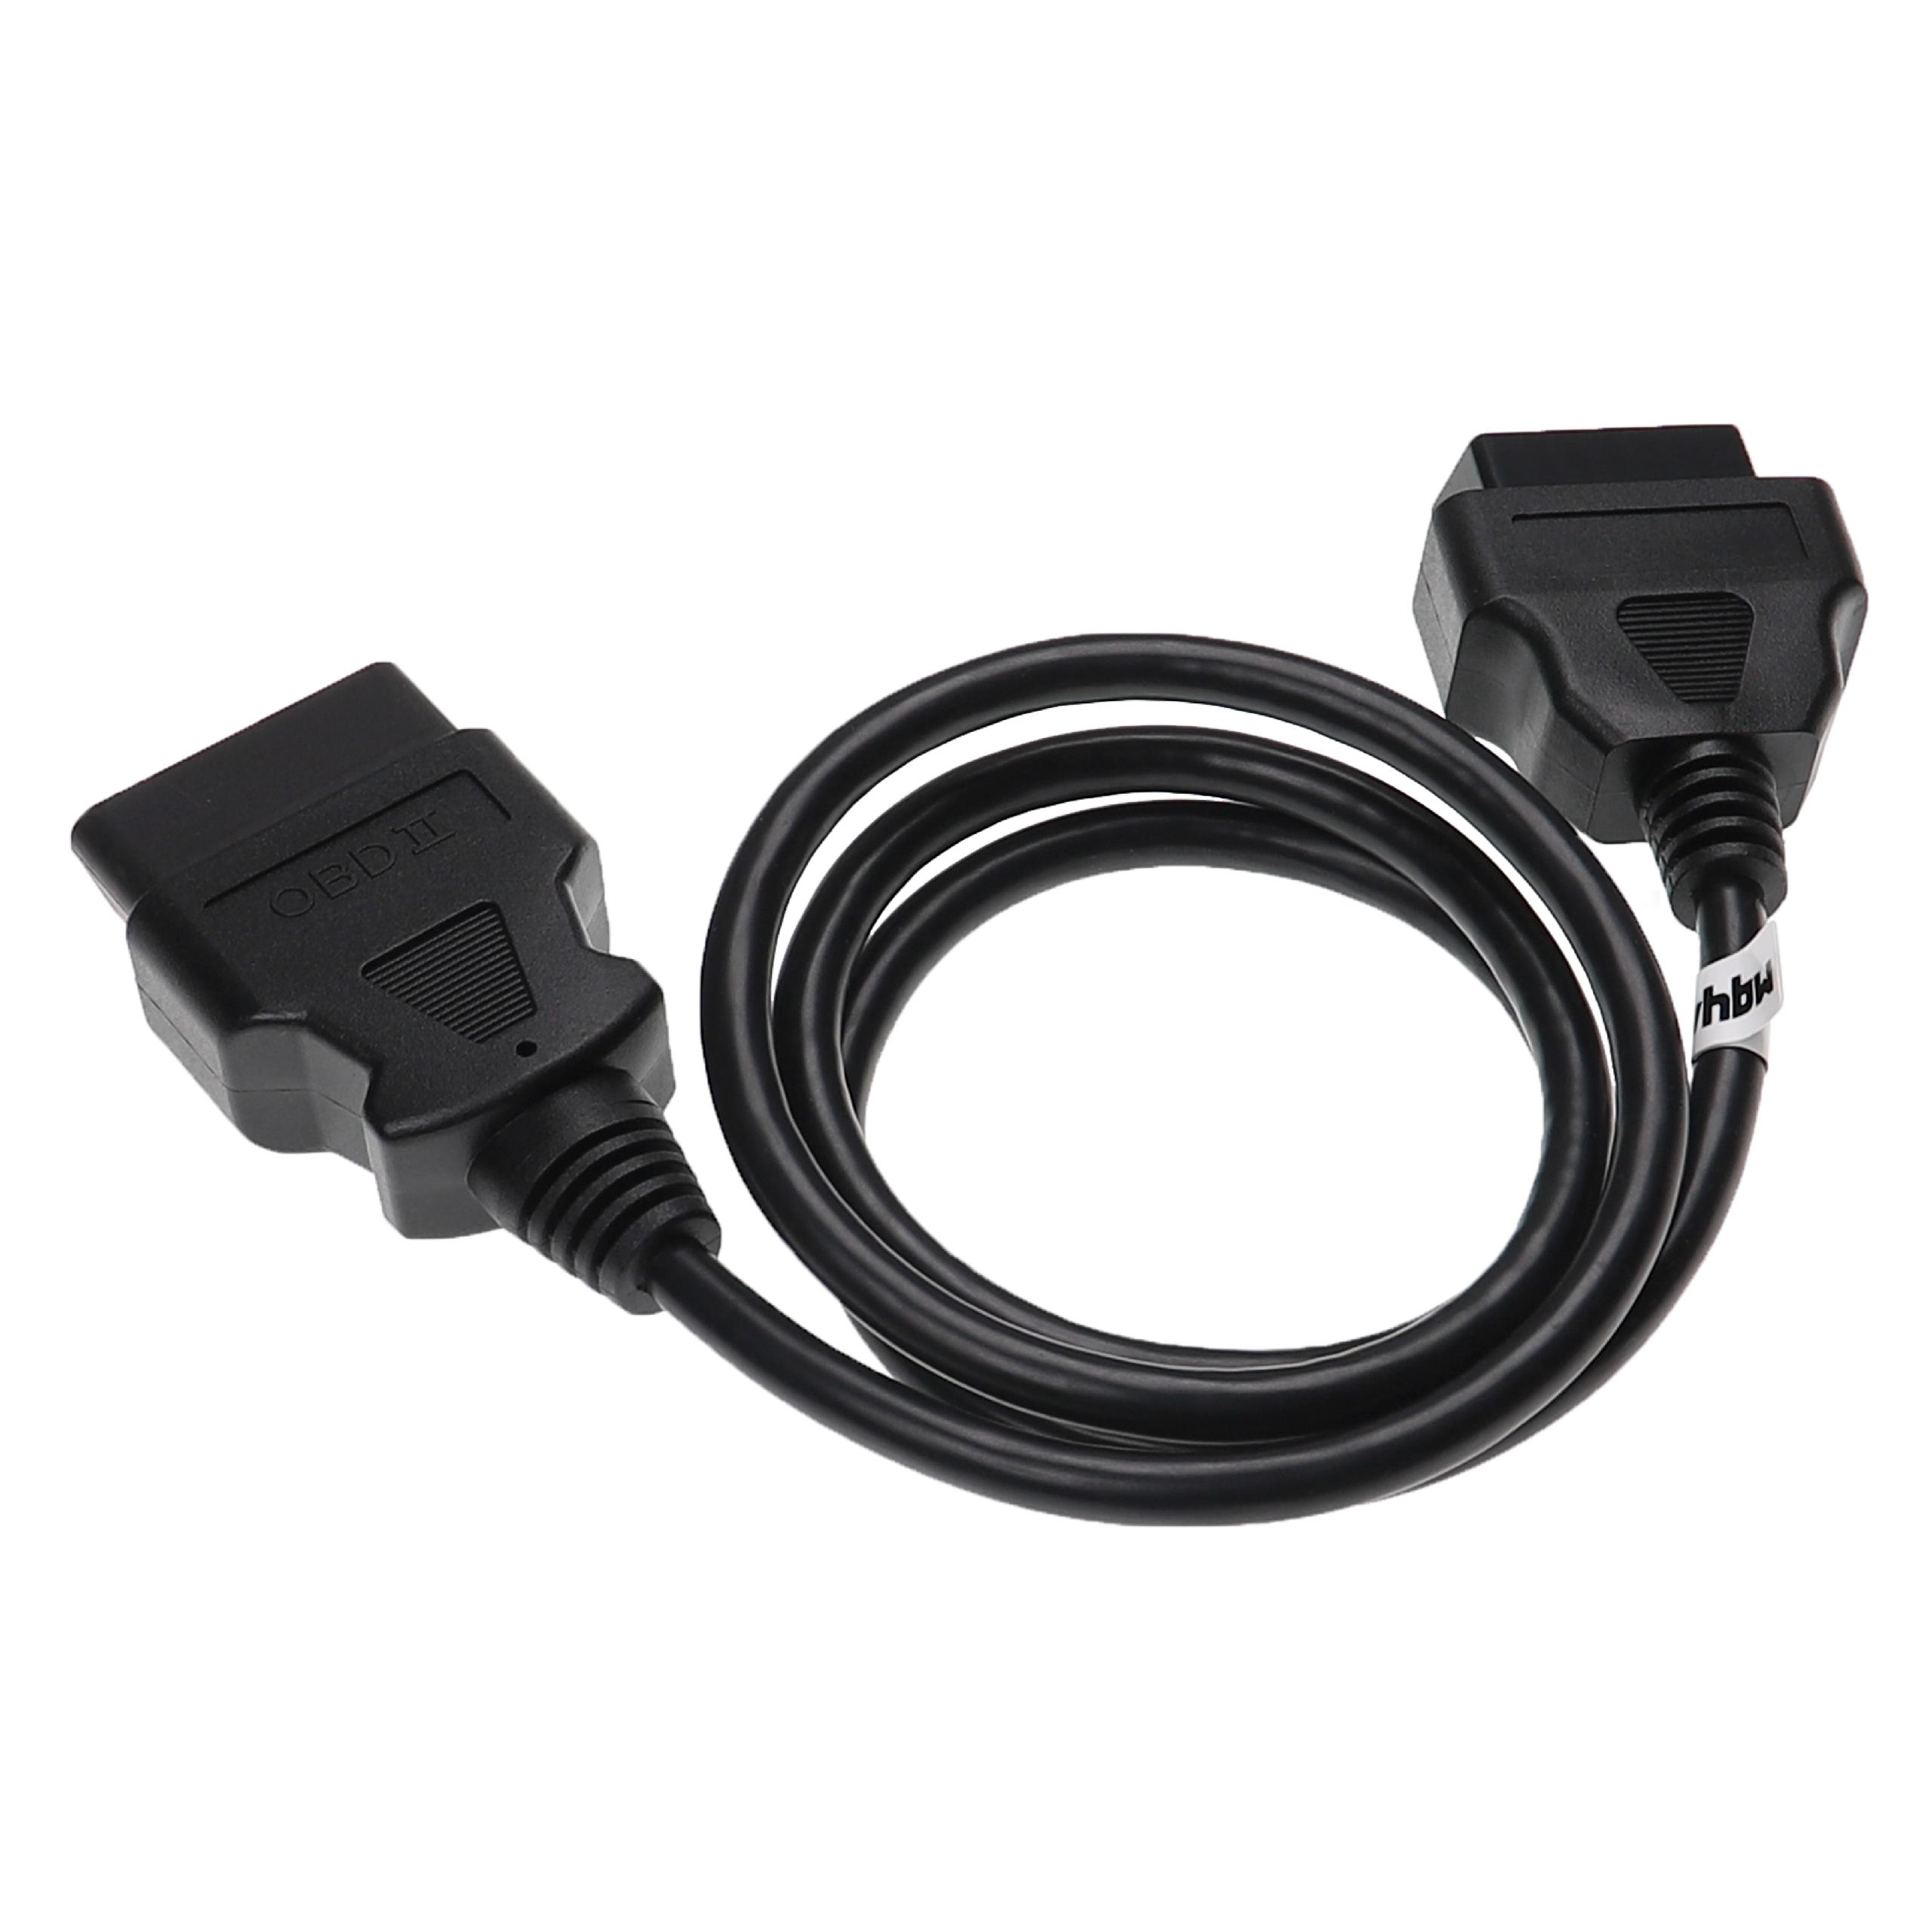 vhbw OBD2 Extension Cable 16 Pin (f) to 16 Pin (m) for LKW, Car, Vehicle - 100 cm